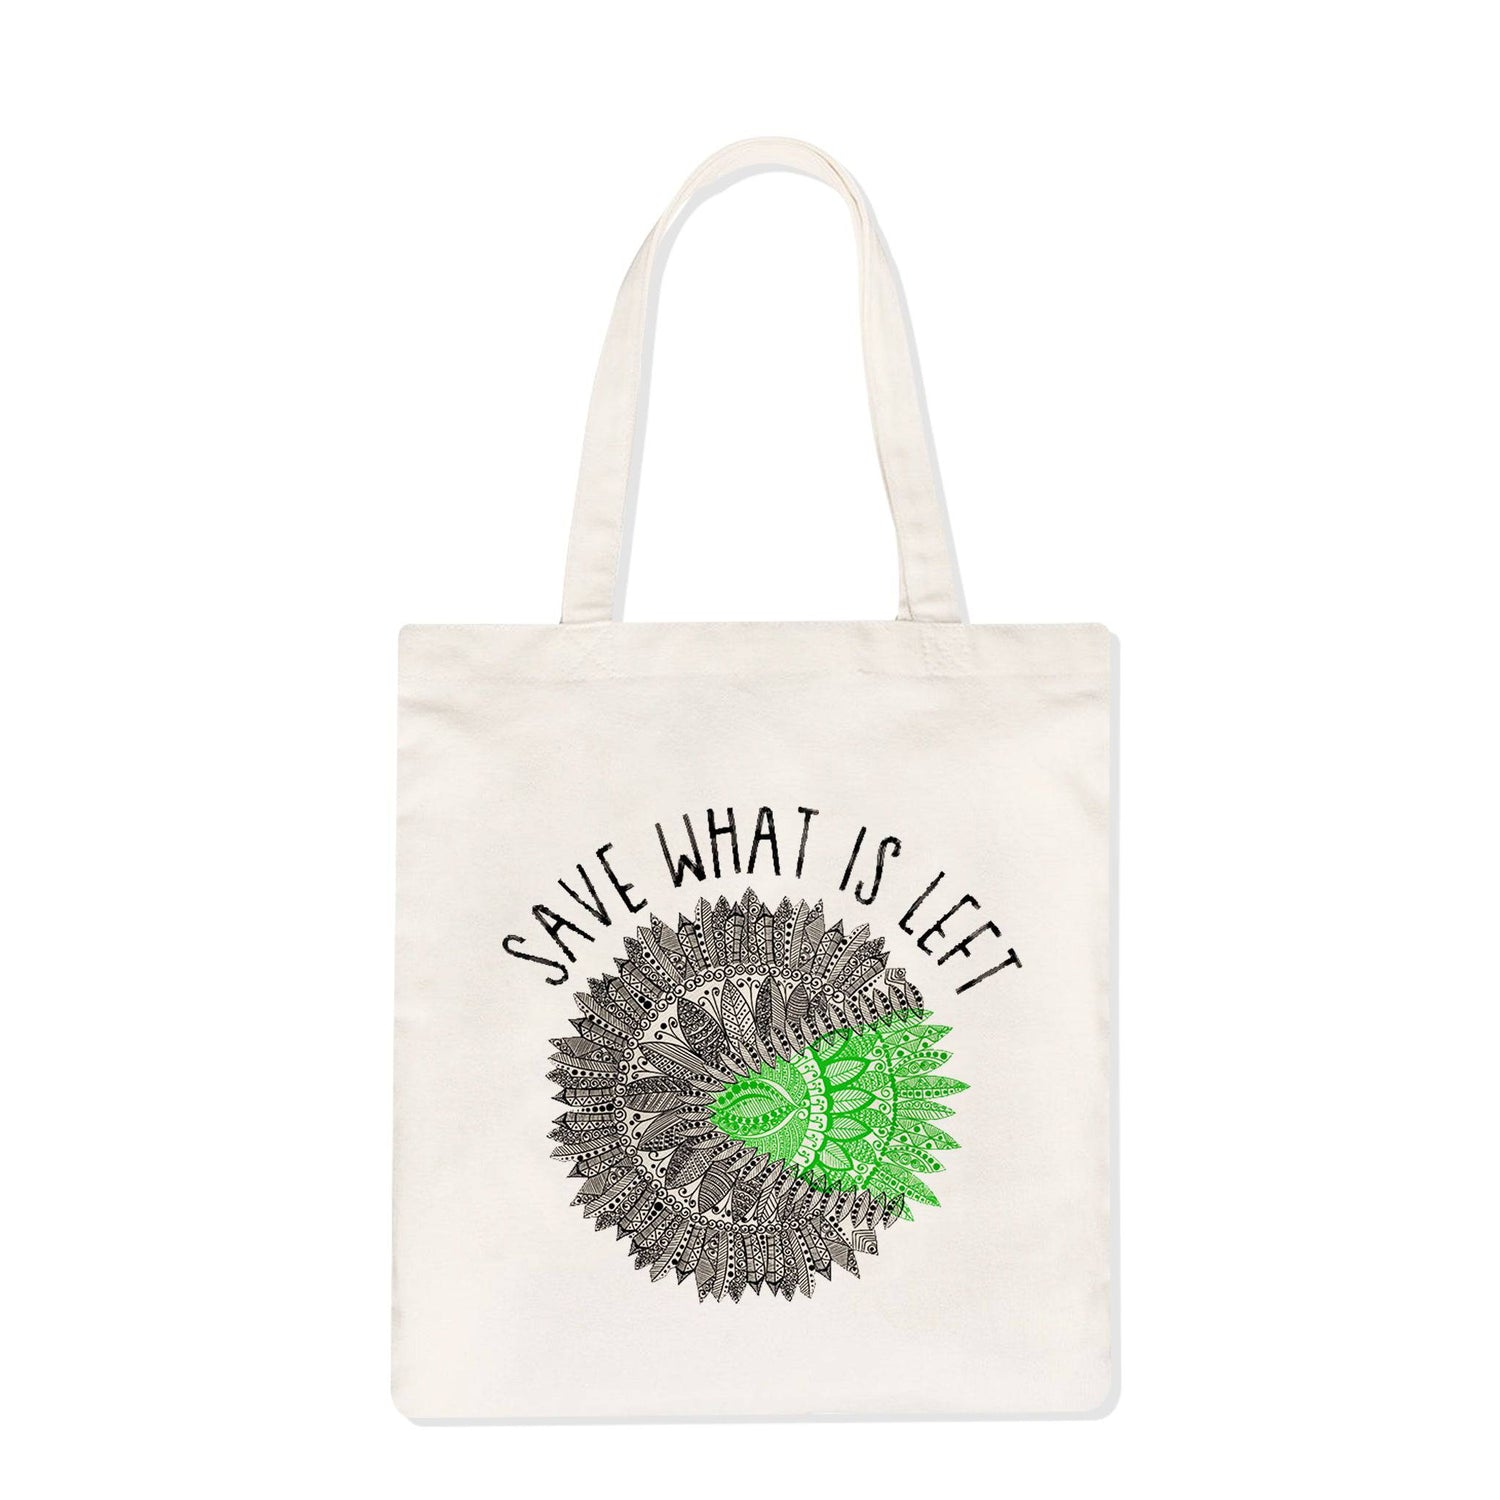 Save What Is Left Natural Tote Bag - One Choice Apparel